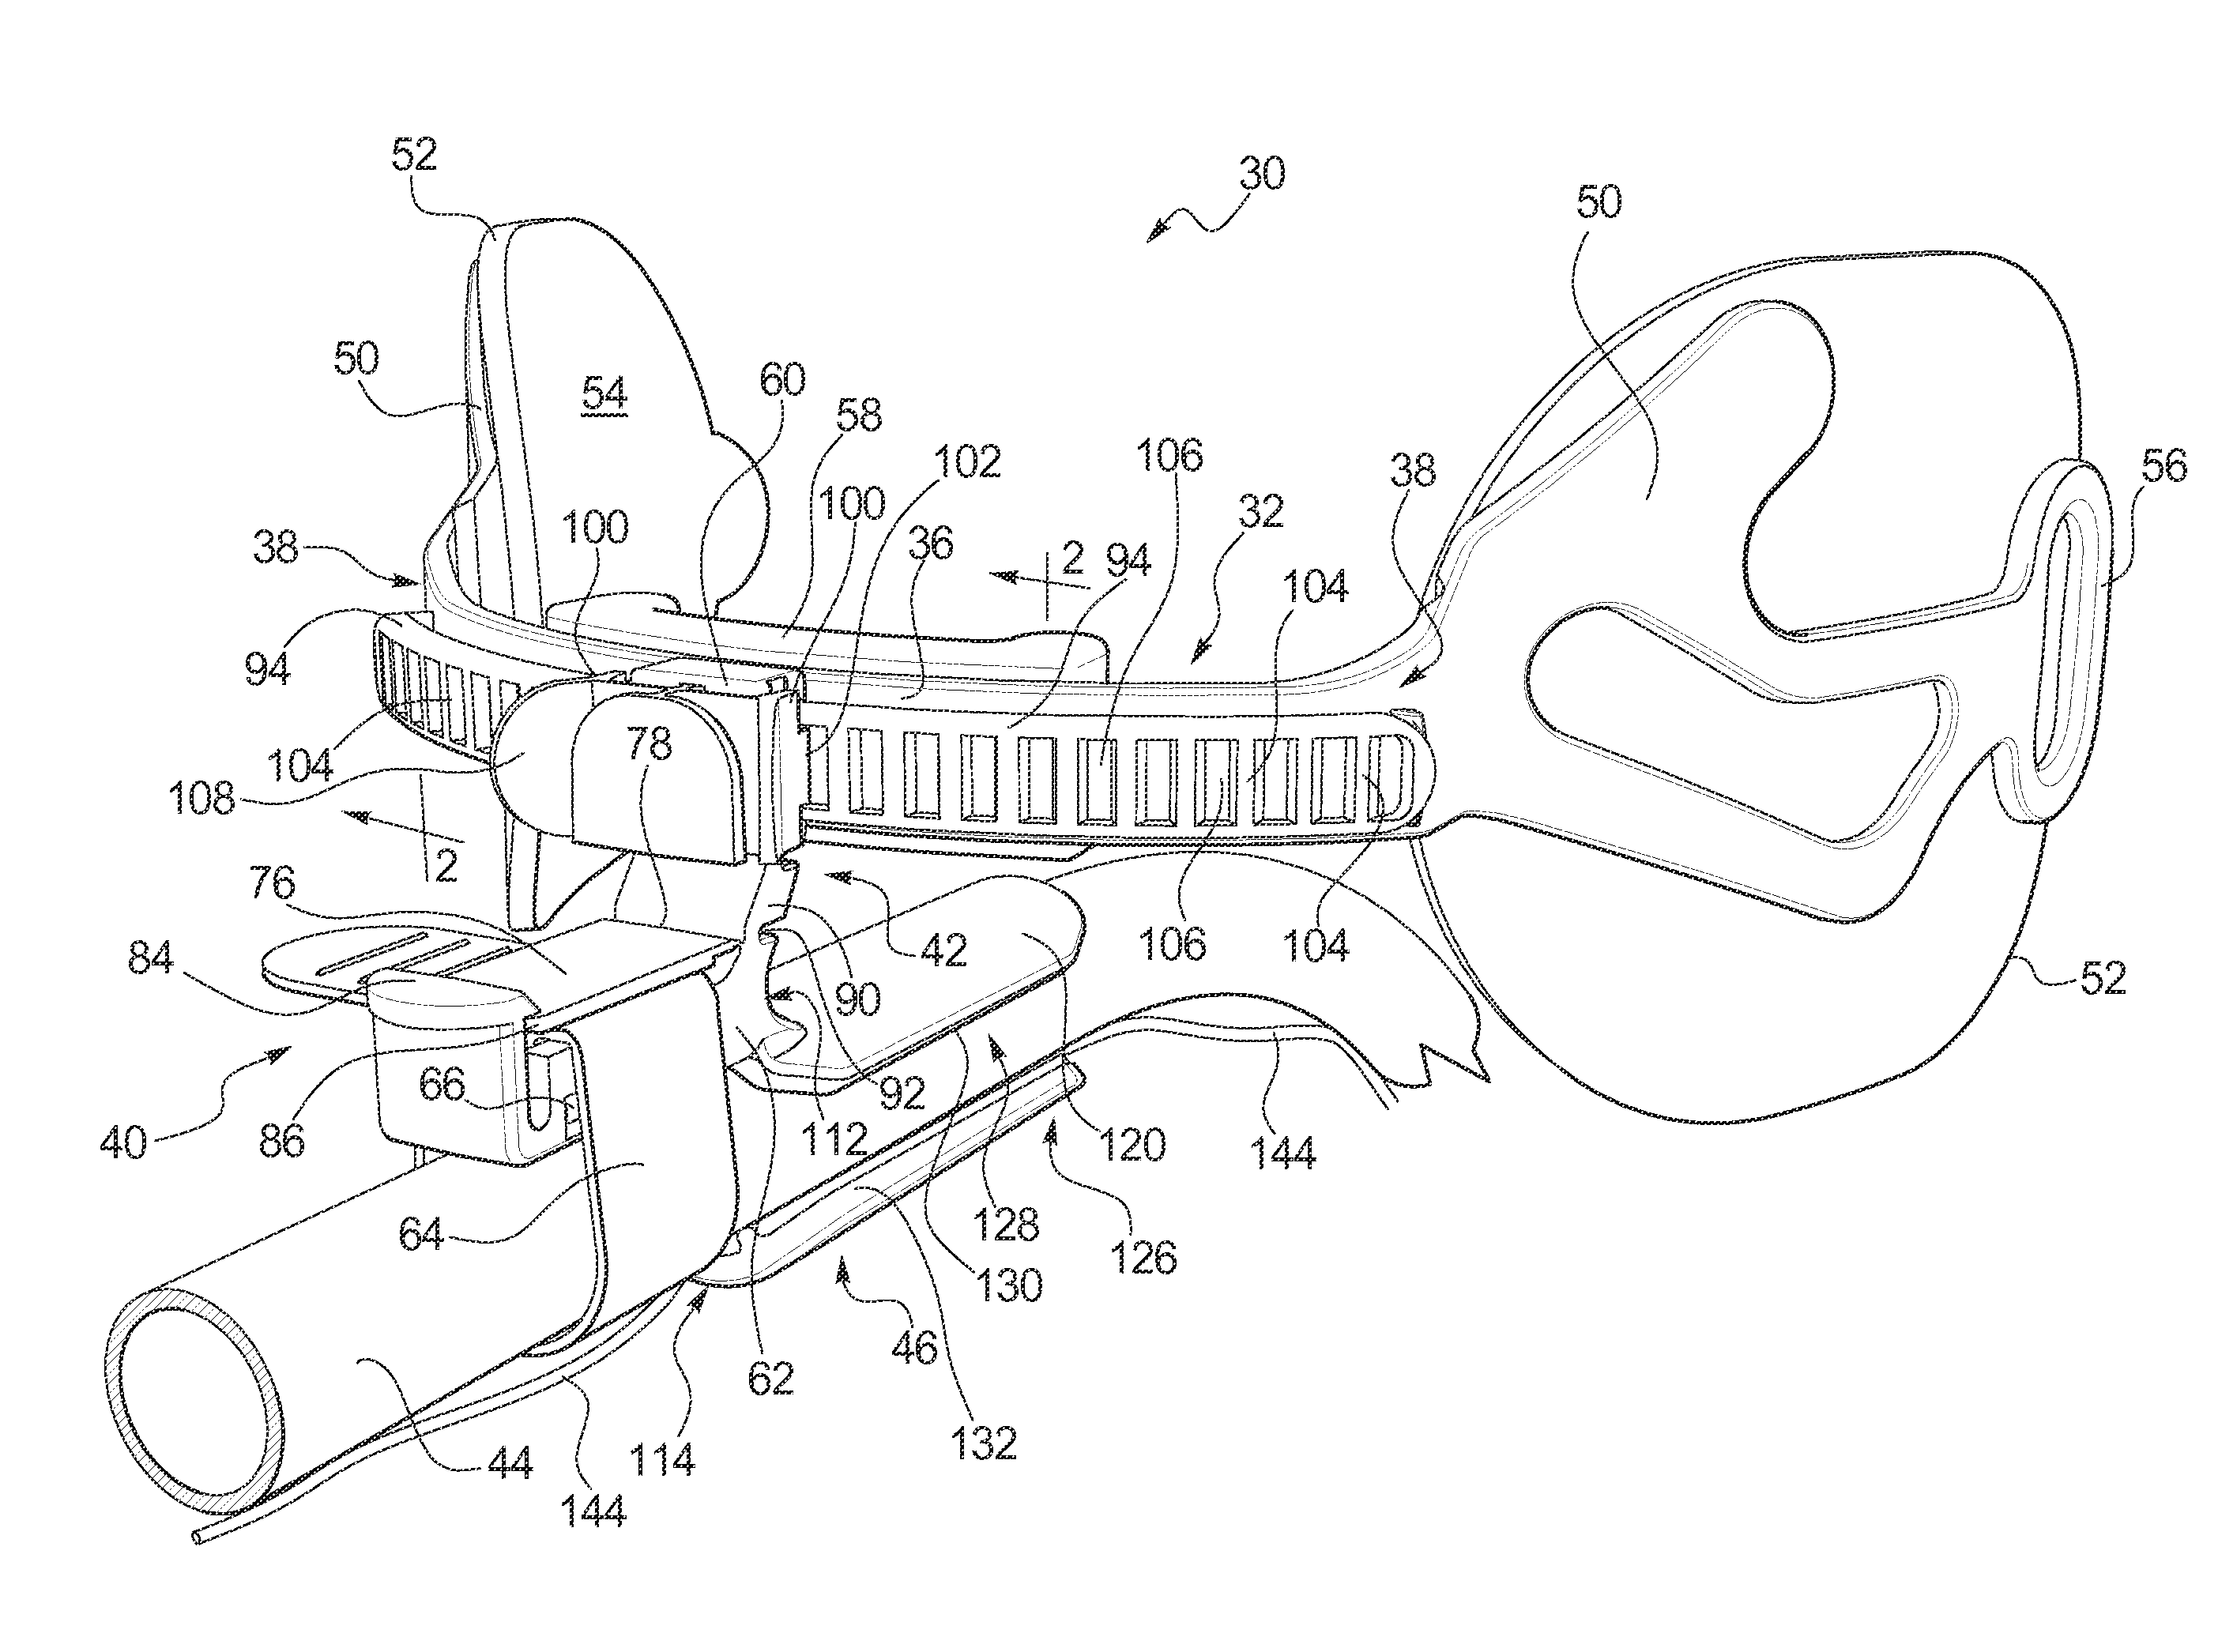 Endotracheal Tube Holding Device with Bite Block